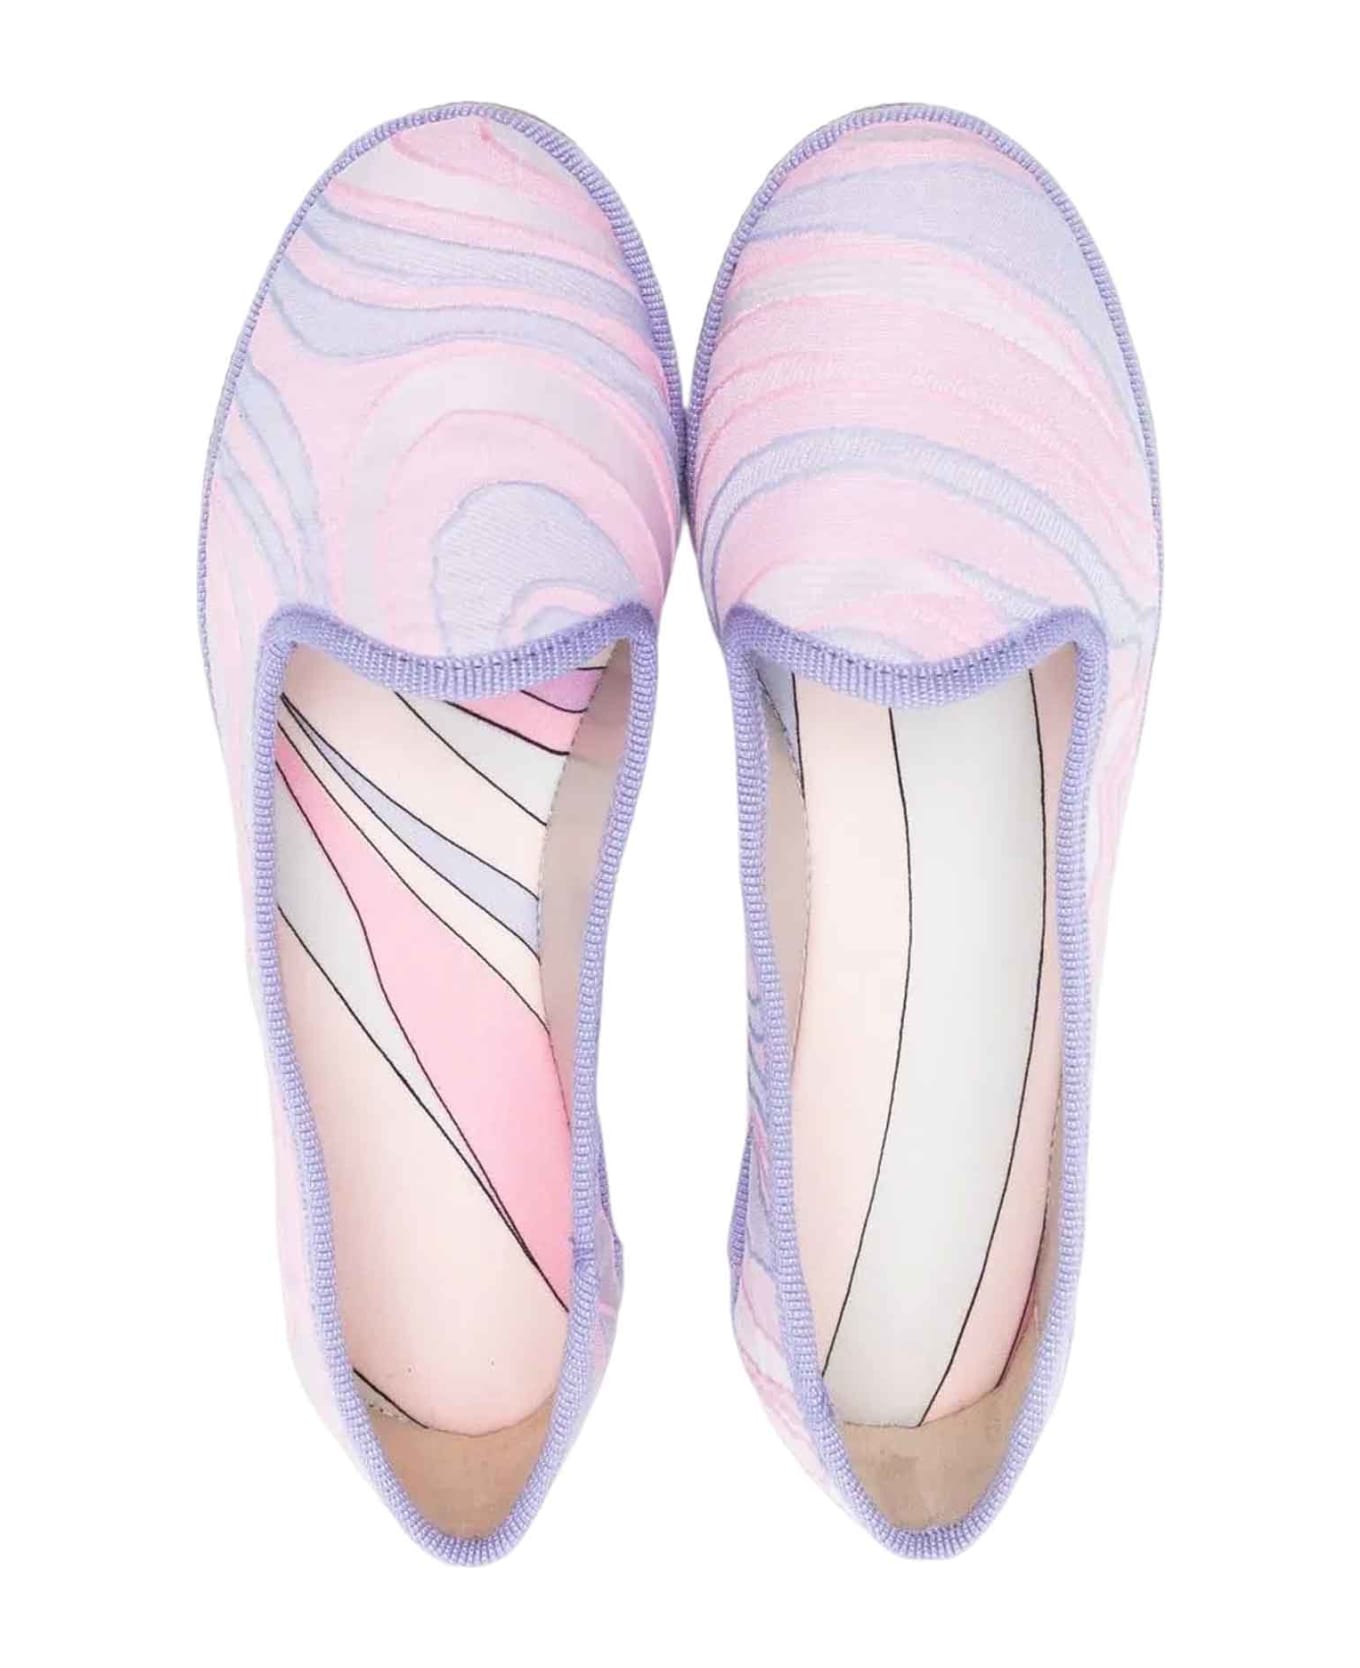 Pucci Pink Shoes Girl - Rosa